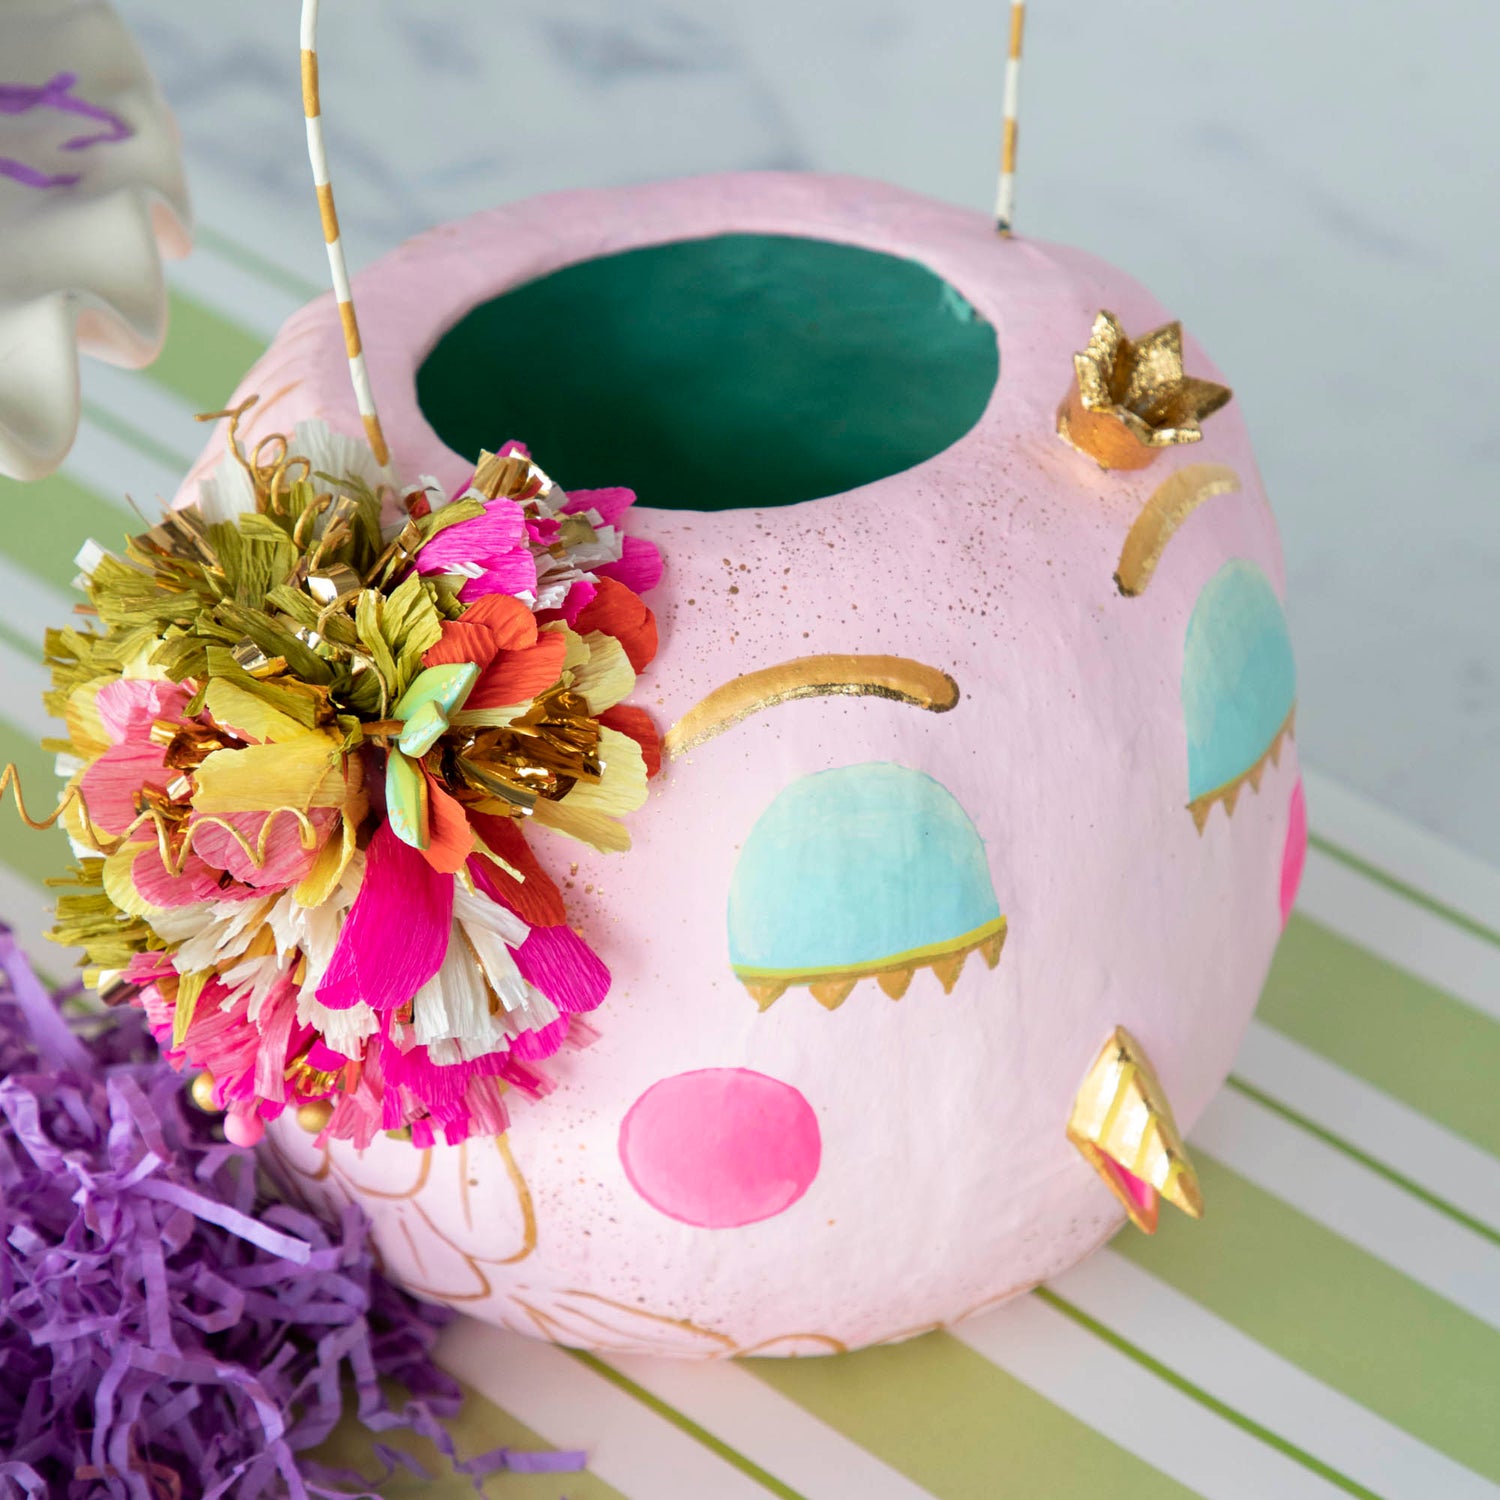 A Glitterville Papermache Easter Bucket shaped flower pot perfect for spring decor.